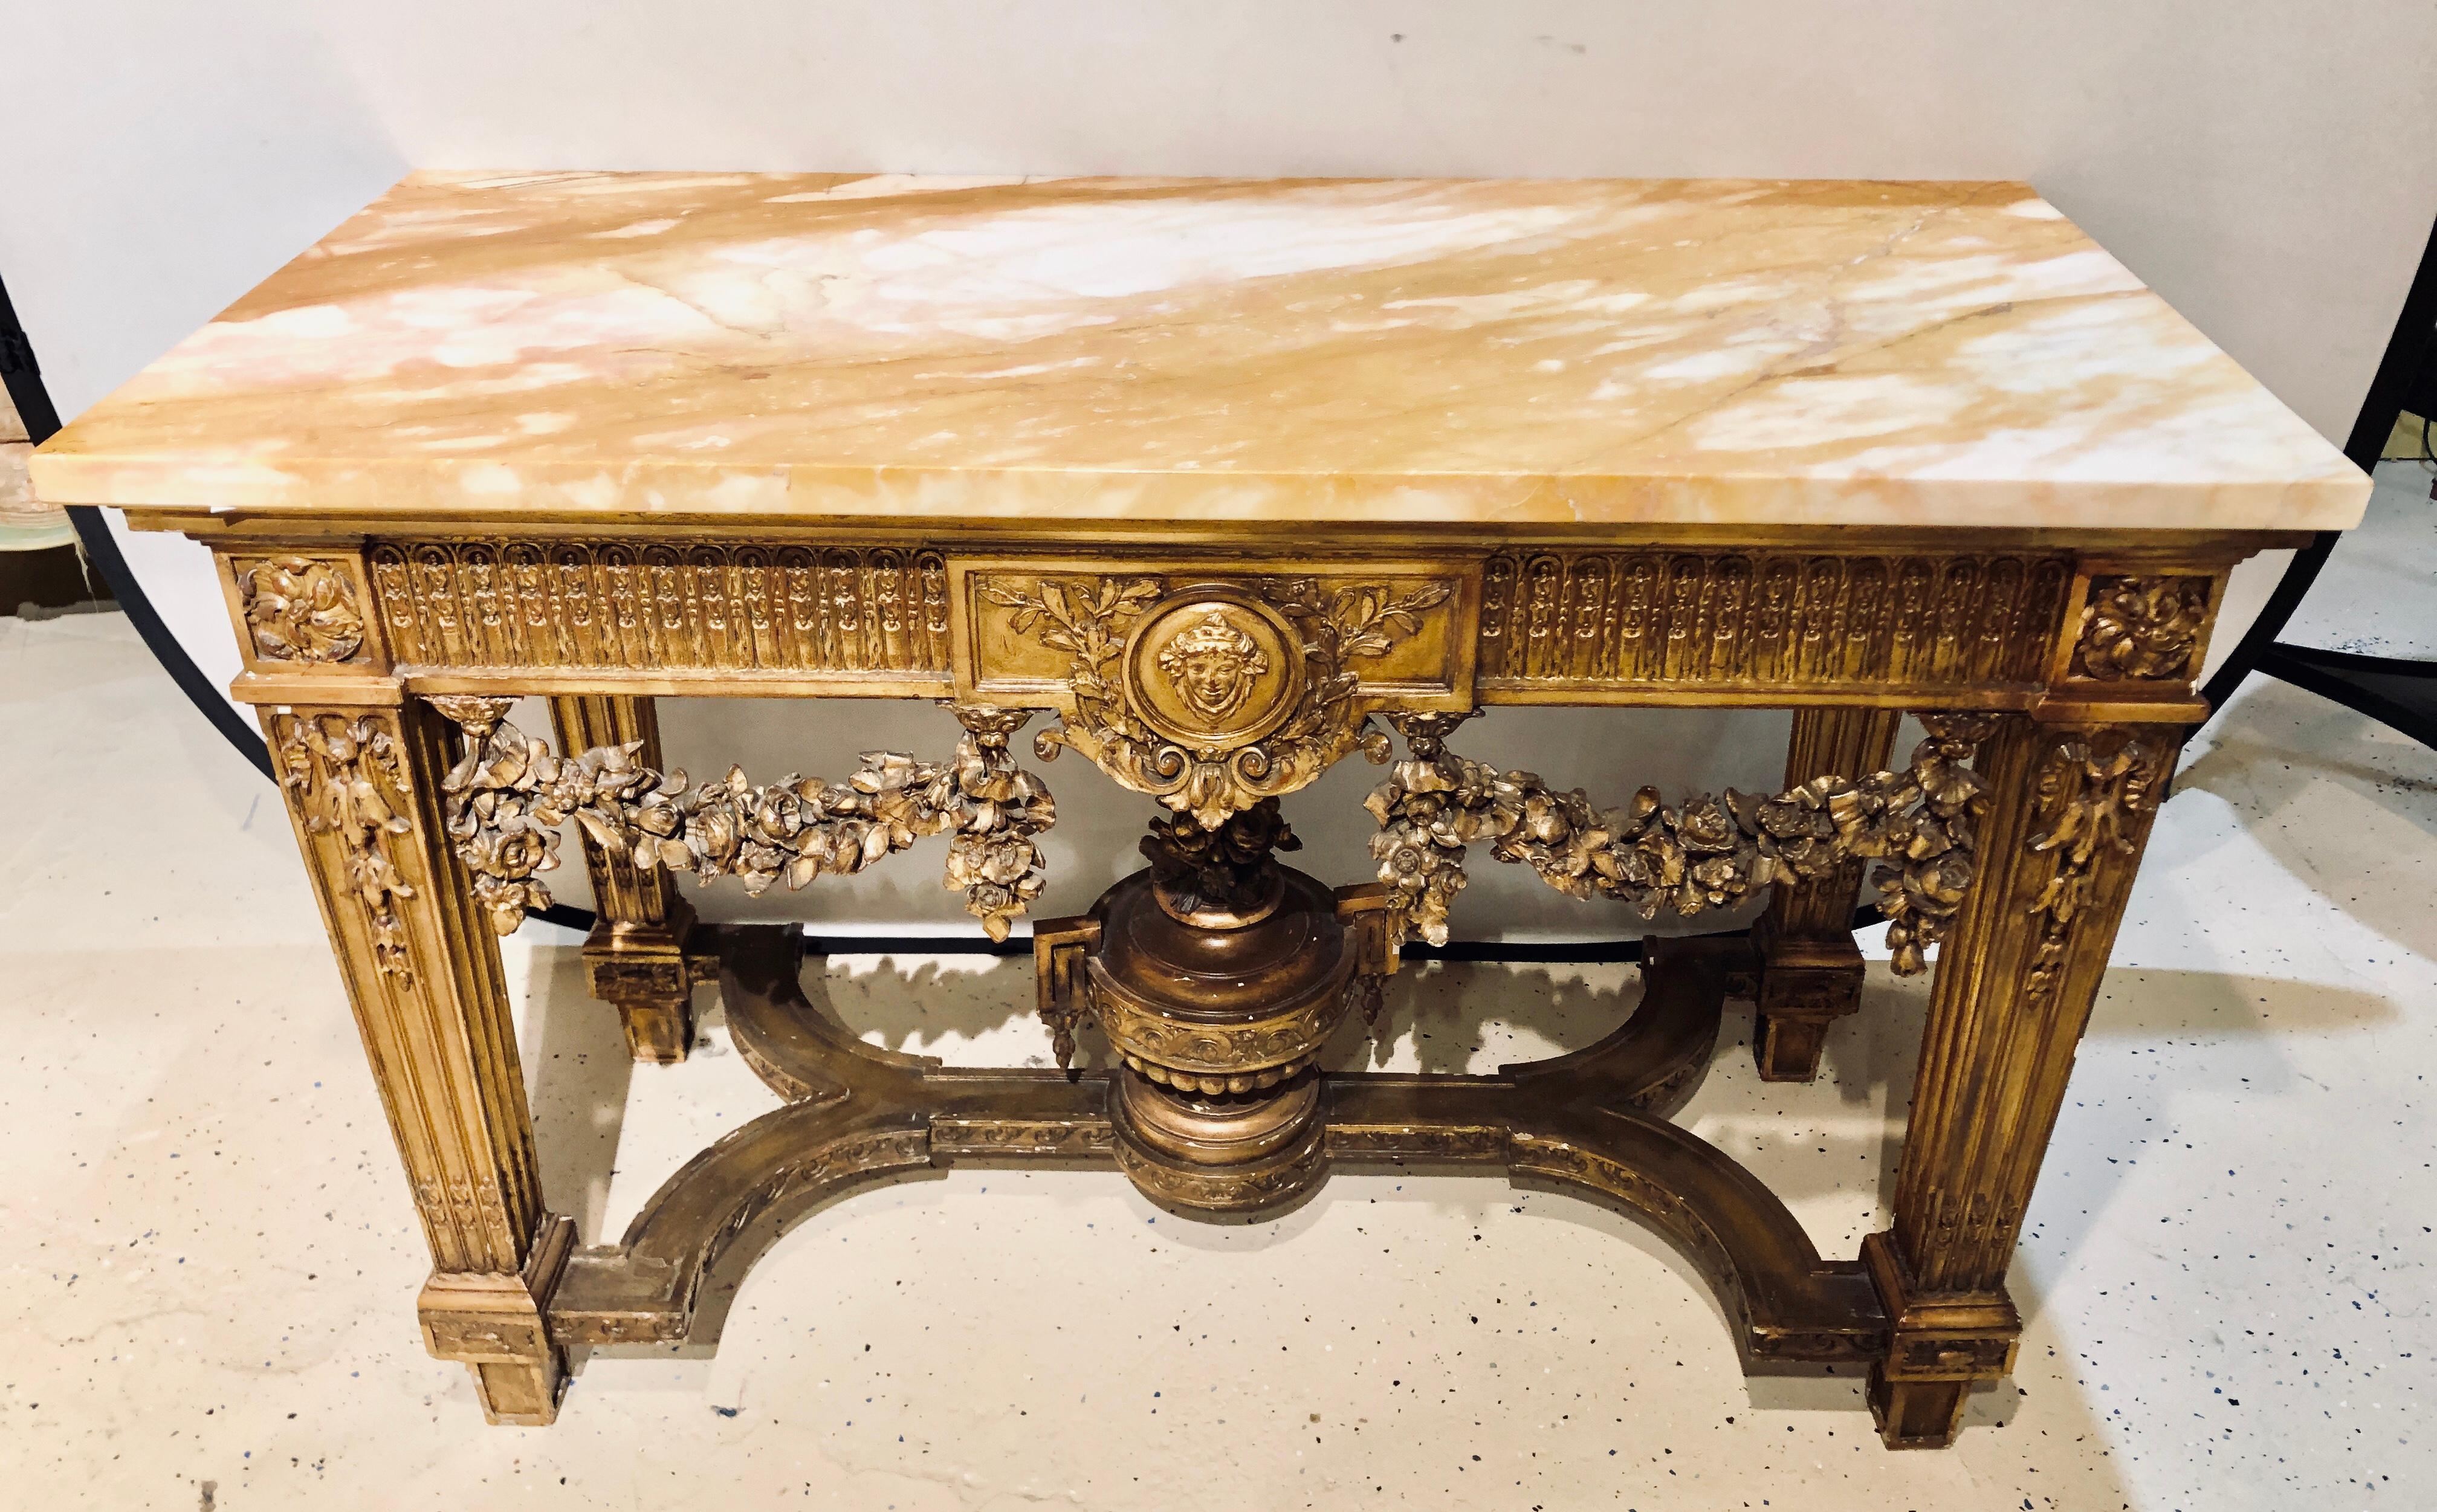 A fine turn of the century Louis XV style giltwood marble-top console table with urn form undercarriage. This fine intricately carved console table depicts the error of grandiose living at its peak. In a gilt worn finish having carved swags of roses